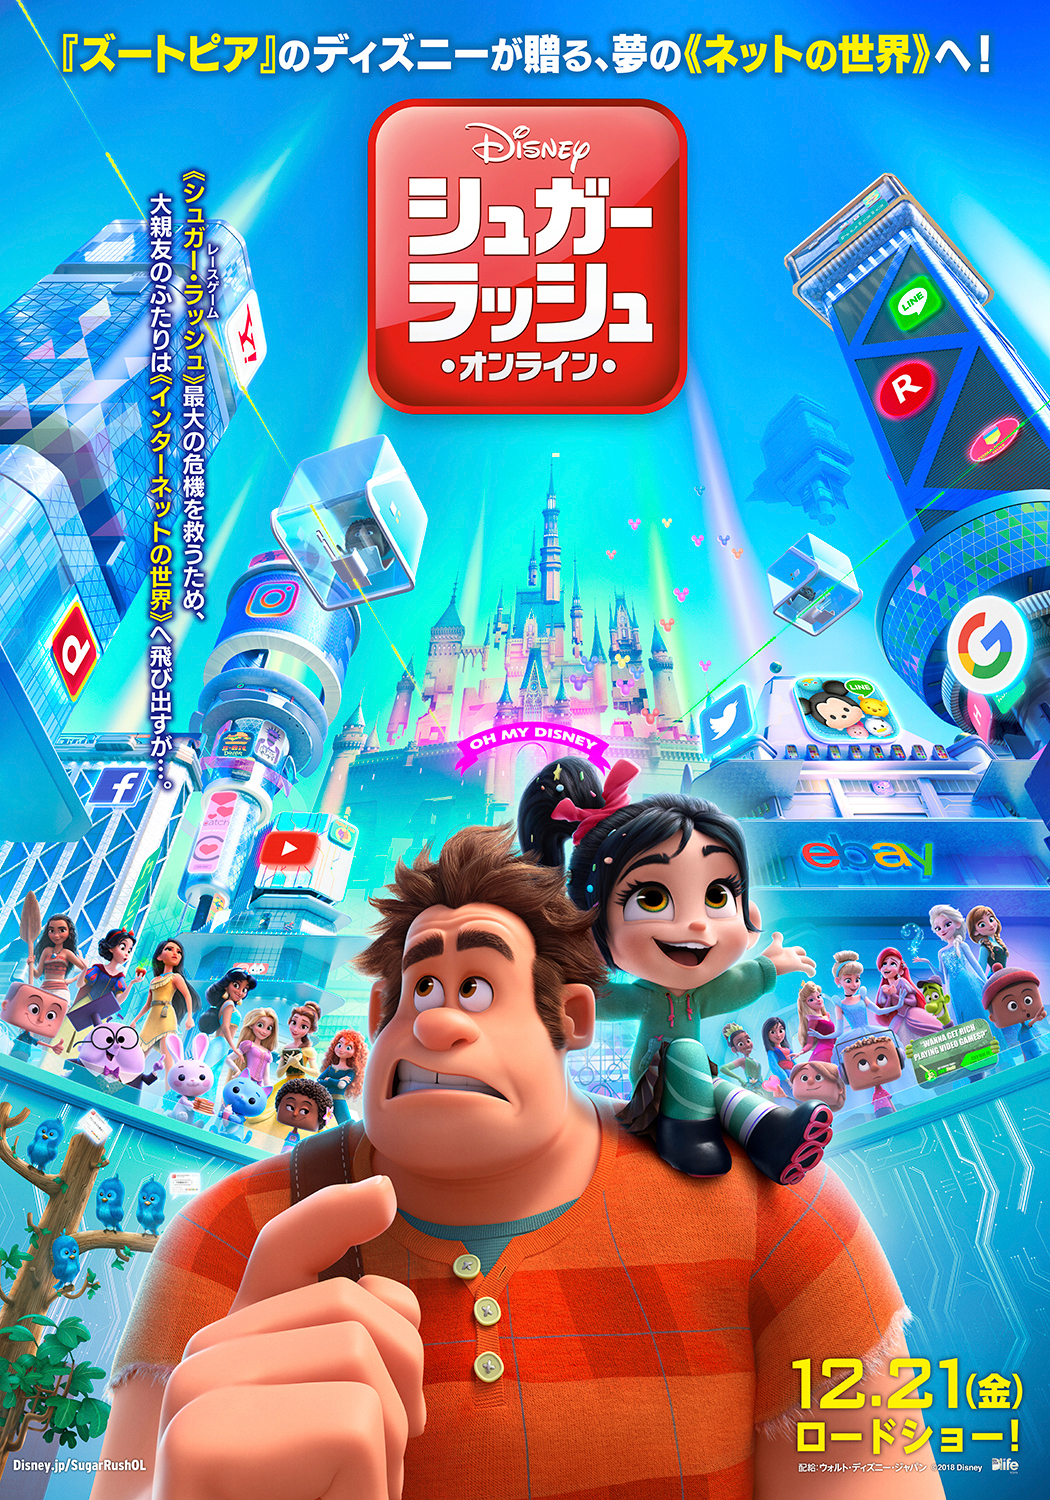 Ralph Breaks the Internet | Intl. Payoff Concept, Finishing & Illustration